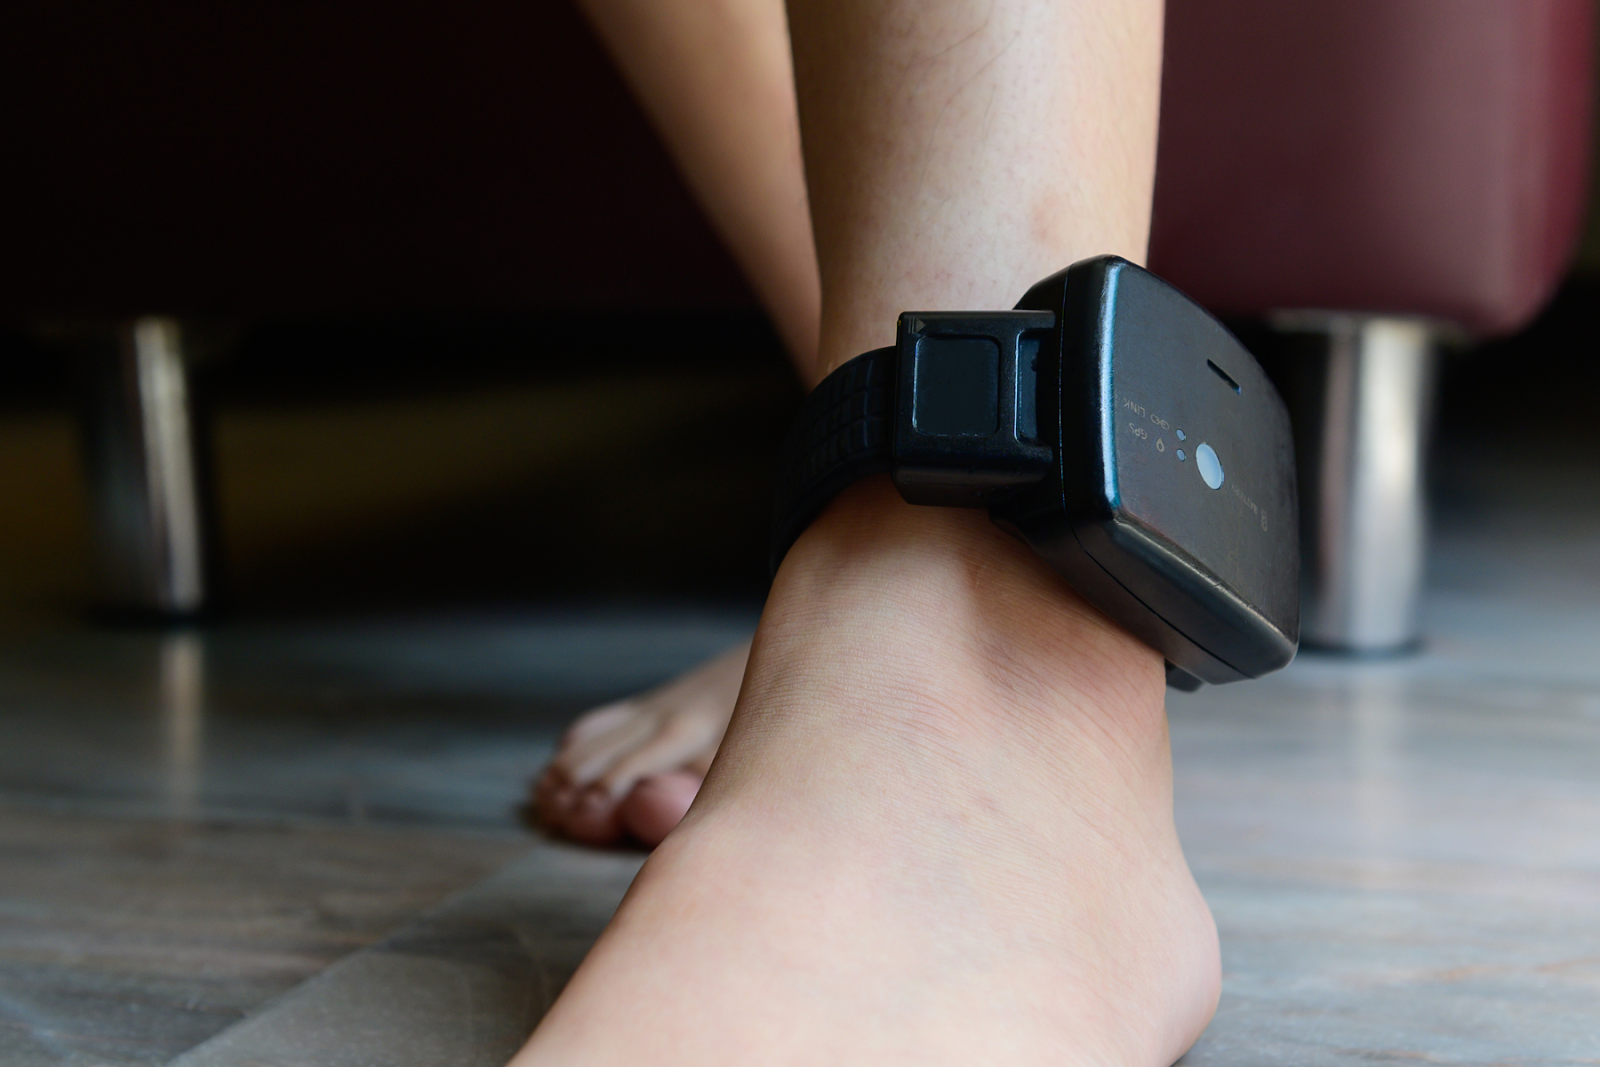 What are some of the issues with Electronic Monitoring? 